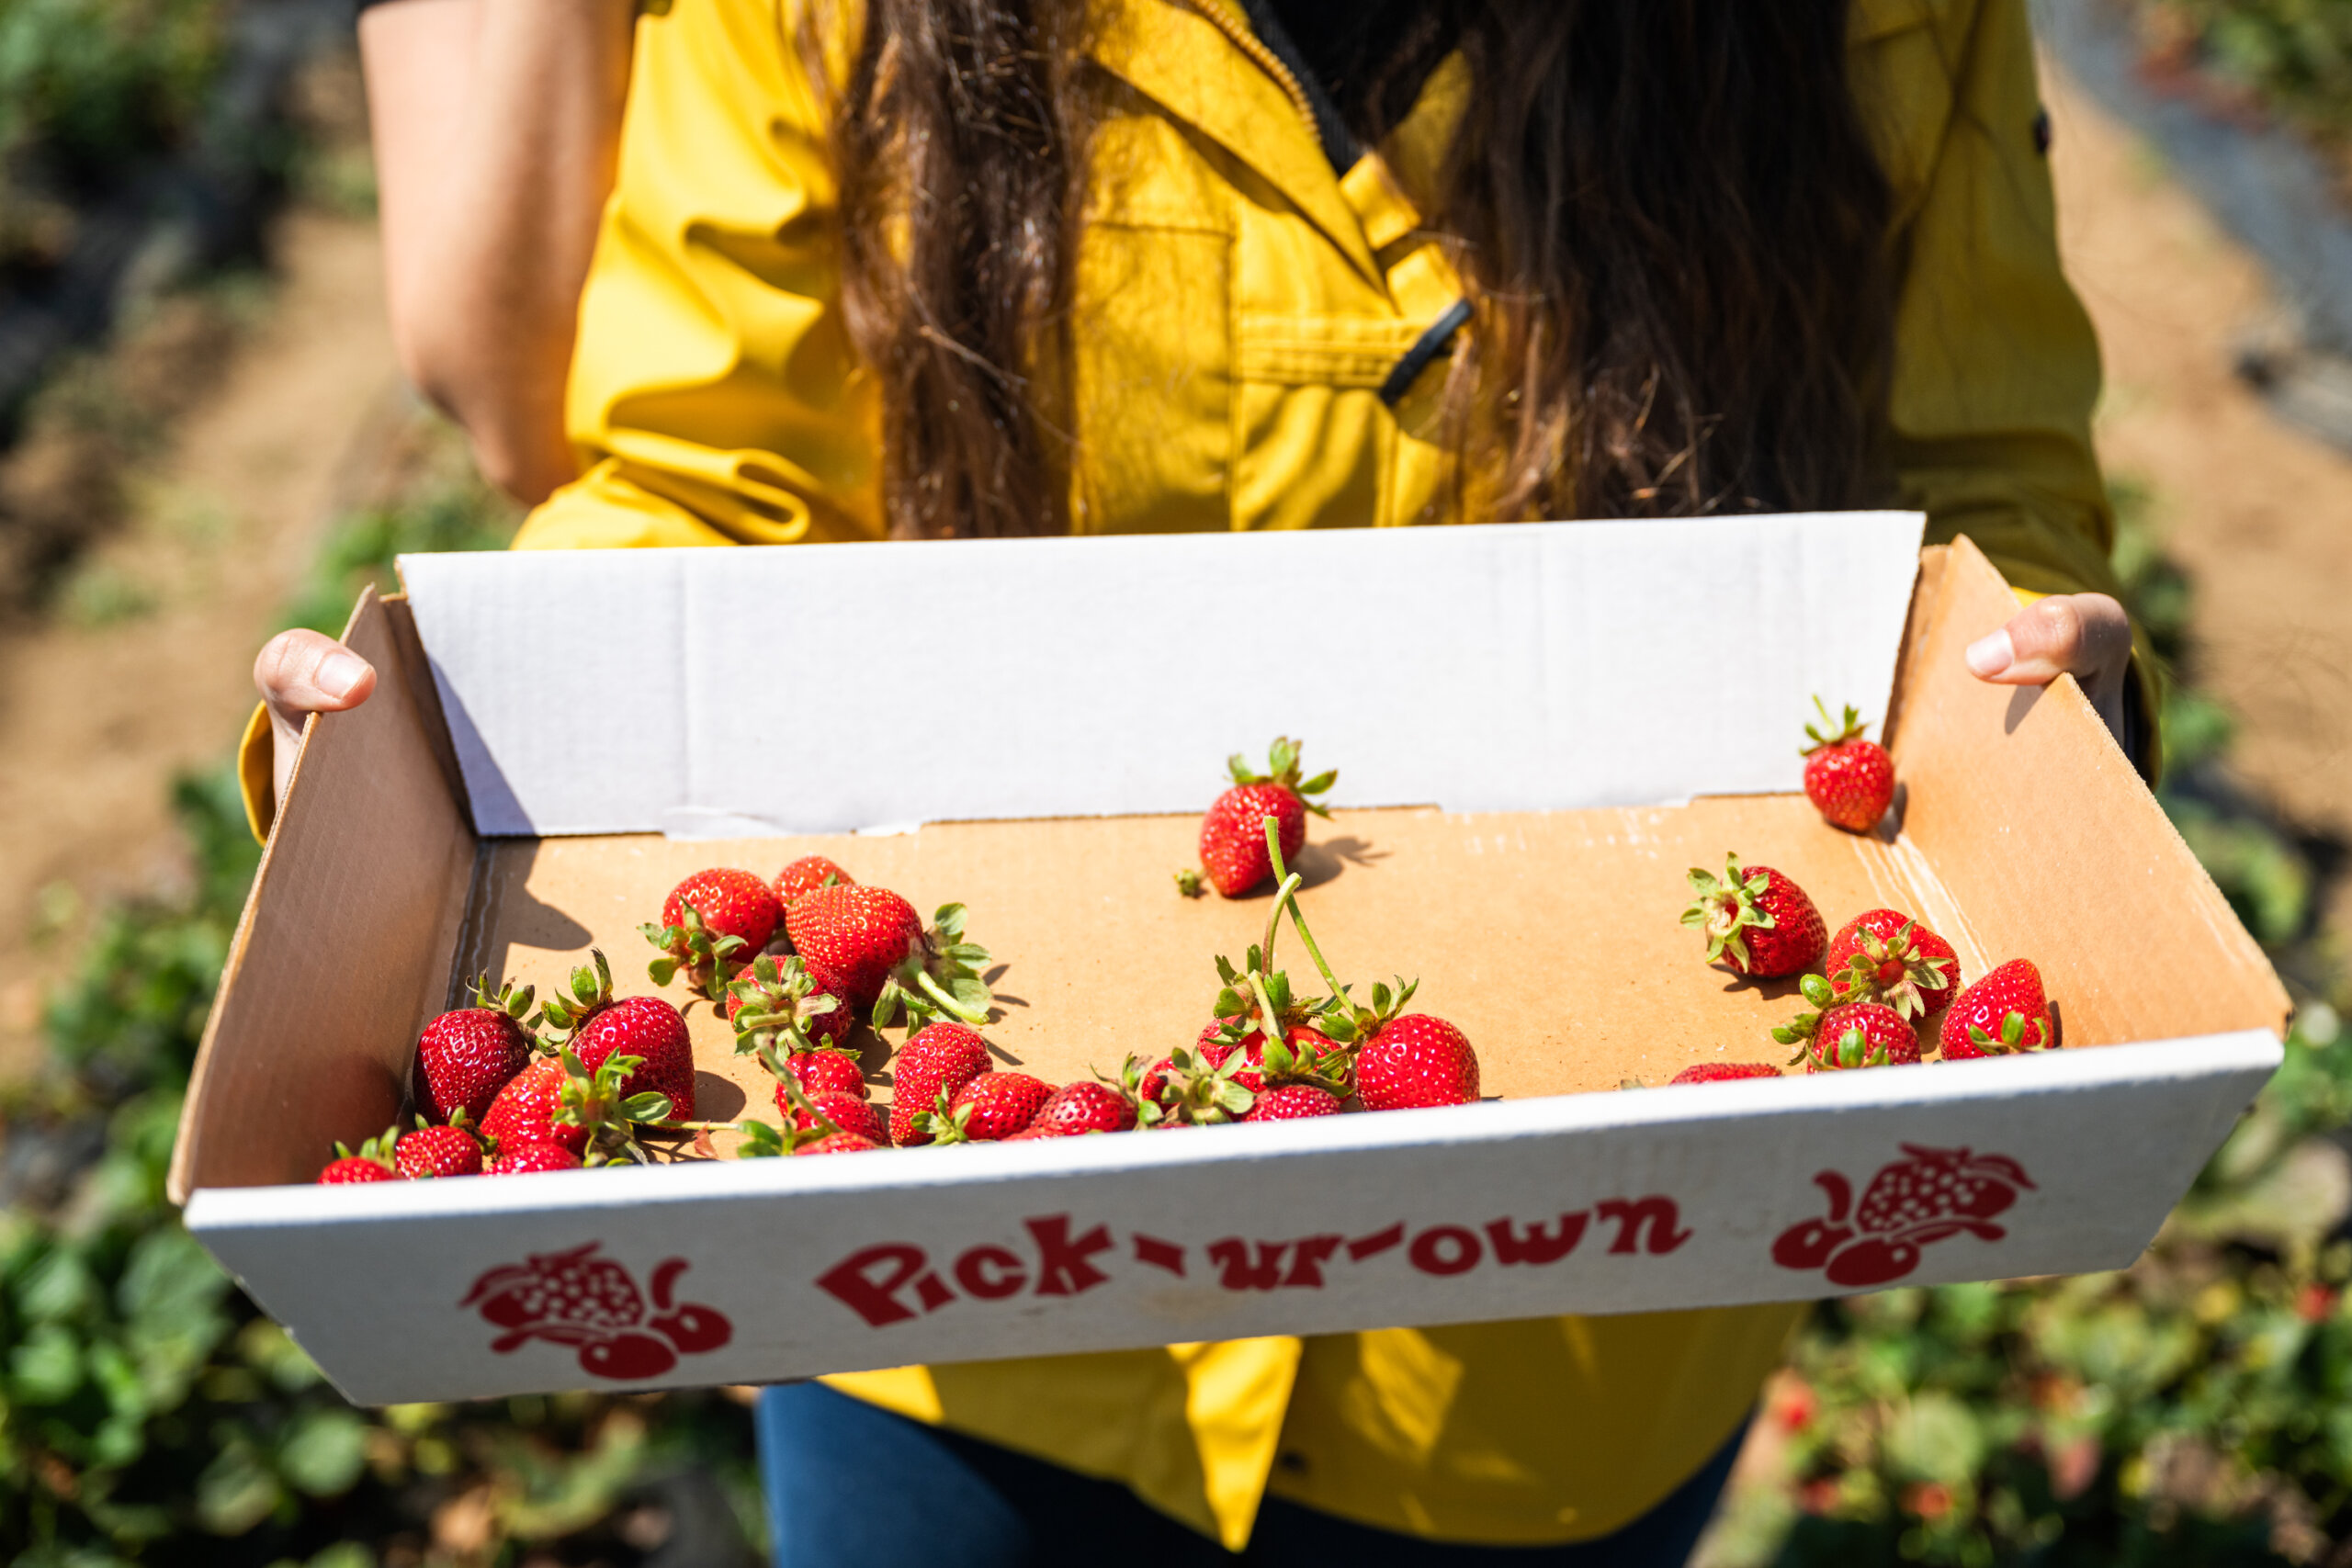 A tray for holding fresh-picked strawberries